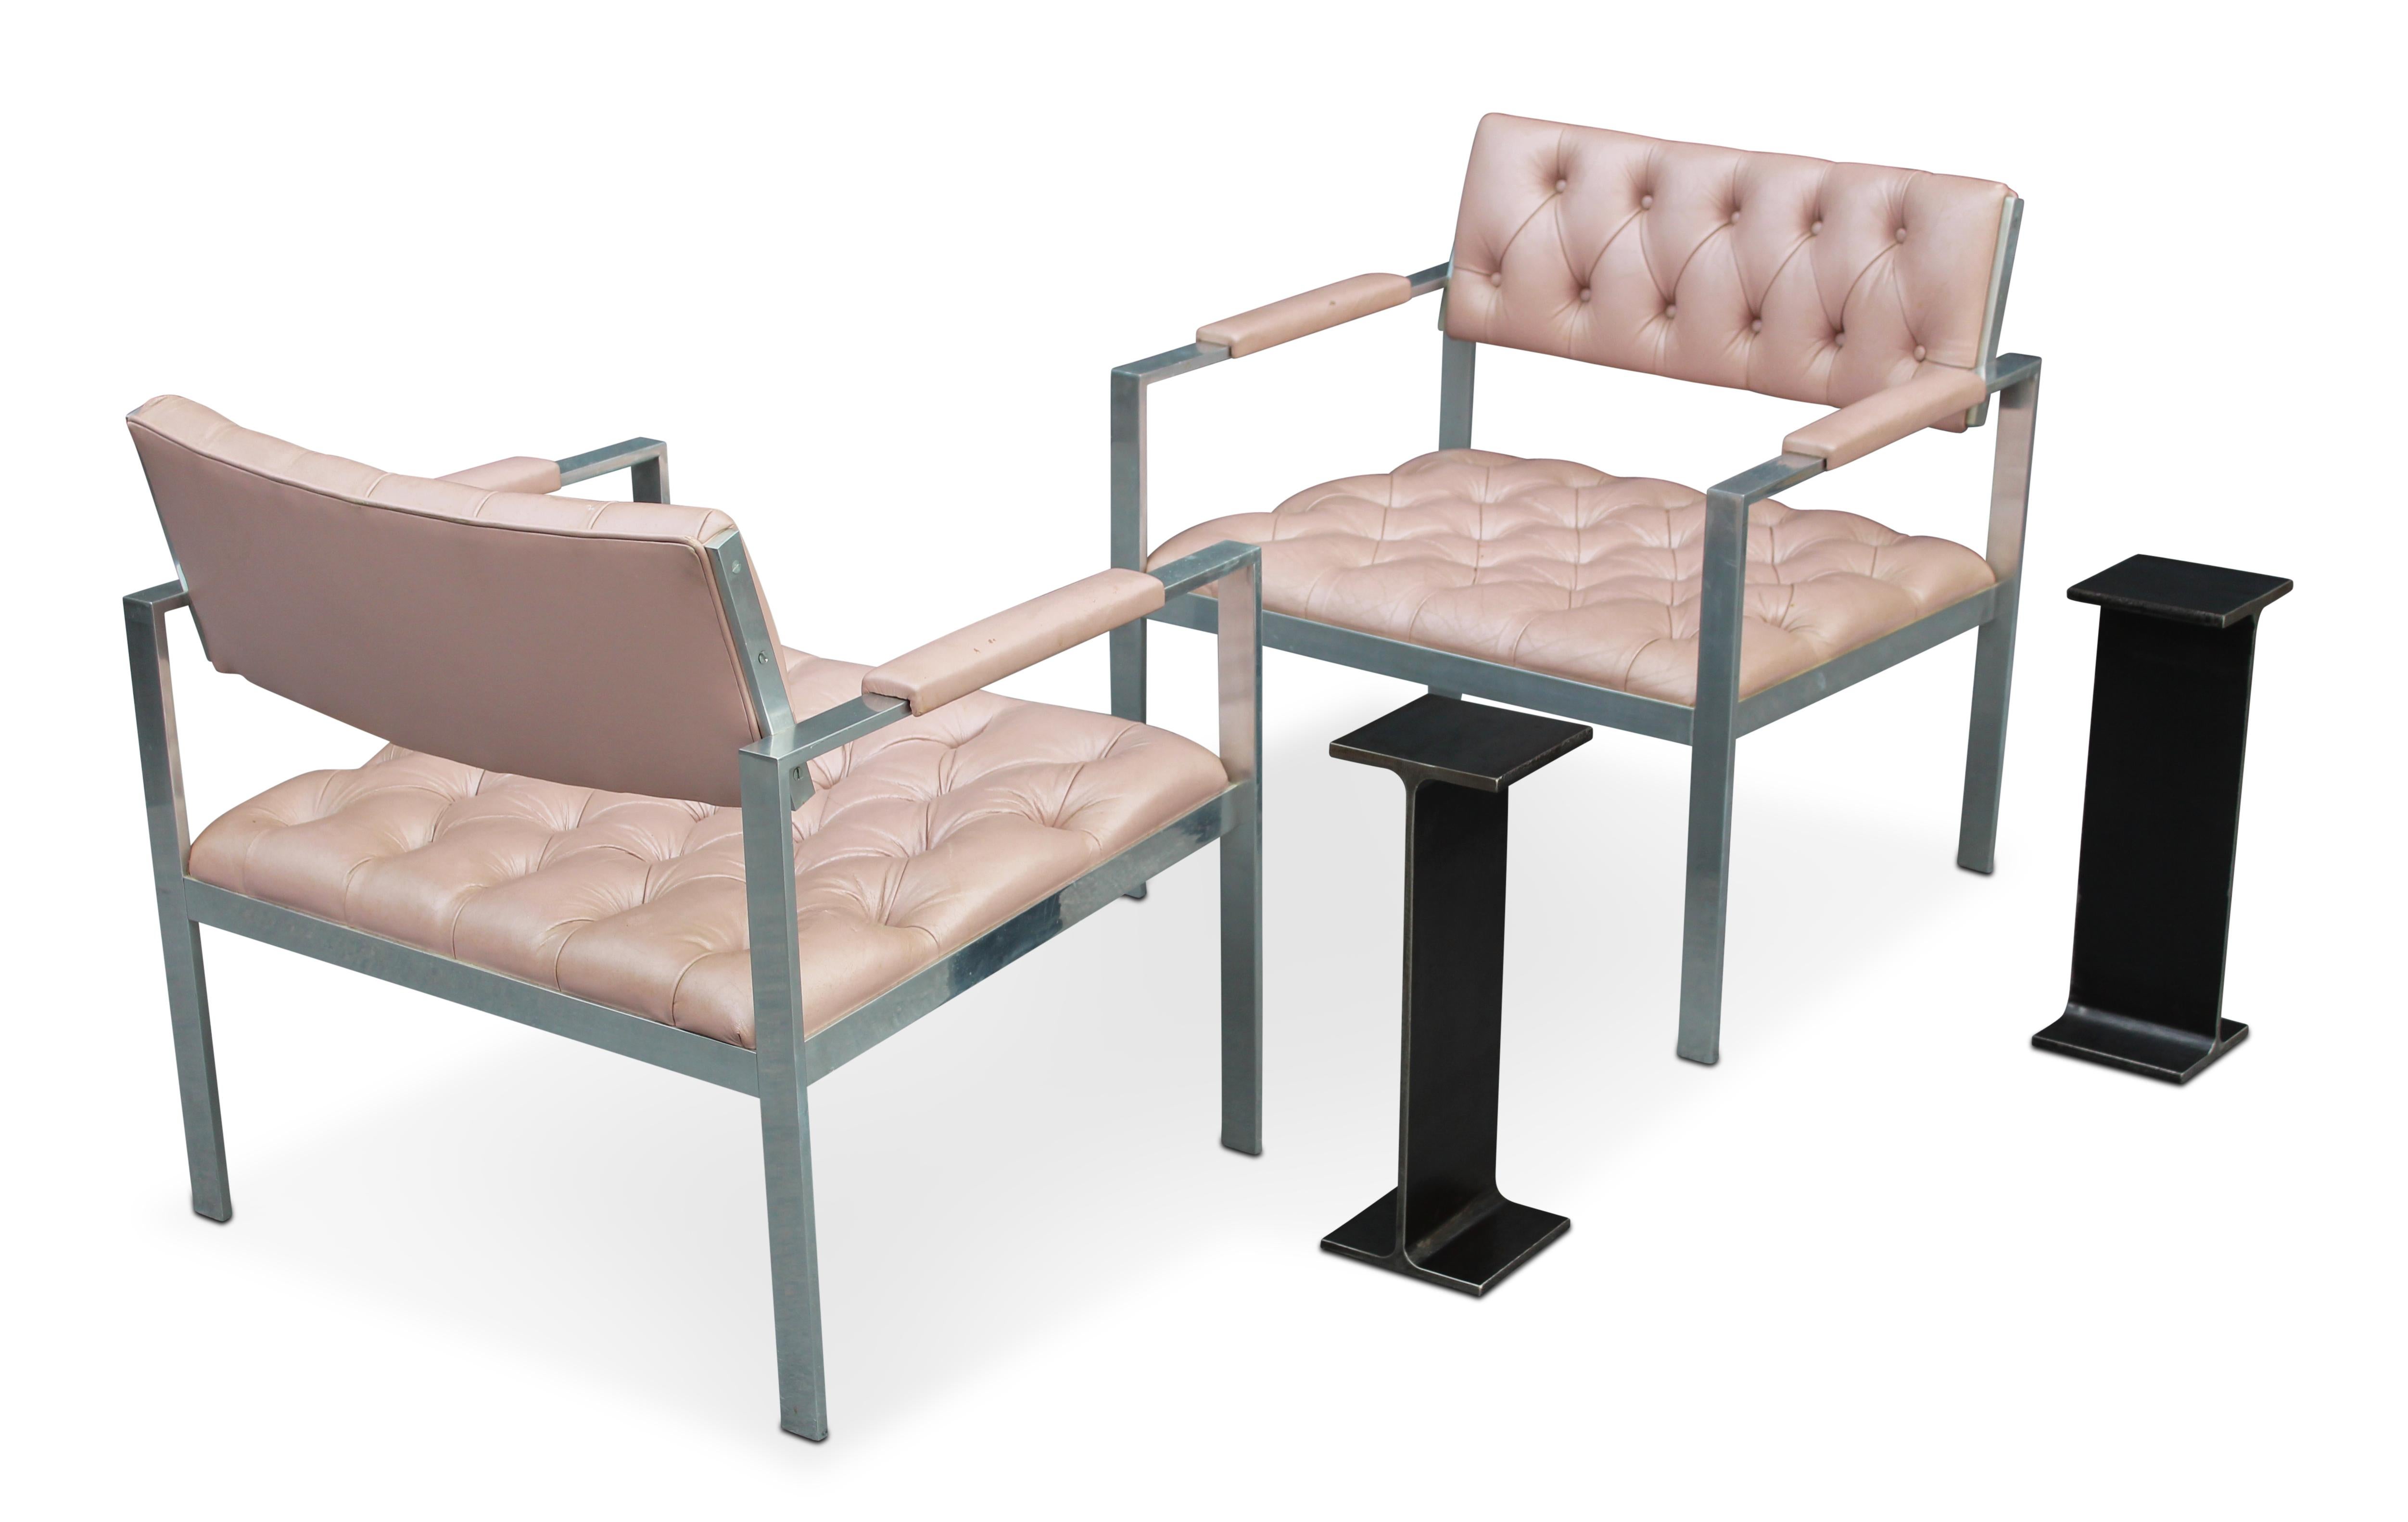 Late 20th Century Pair of Rare Harvey Probber Polished Aluminum & Pink Leather Lounge Chairs 1970s For Sale